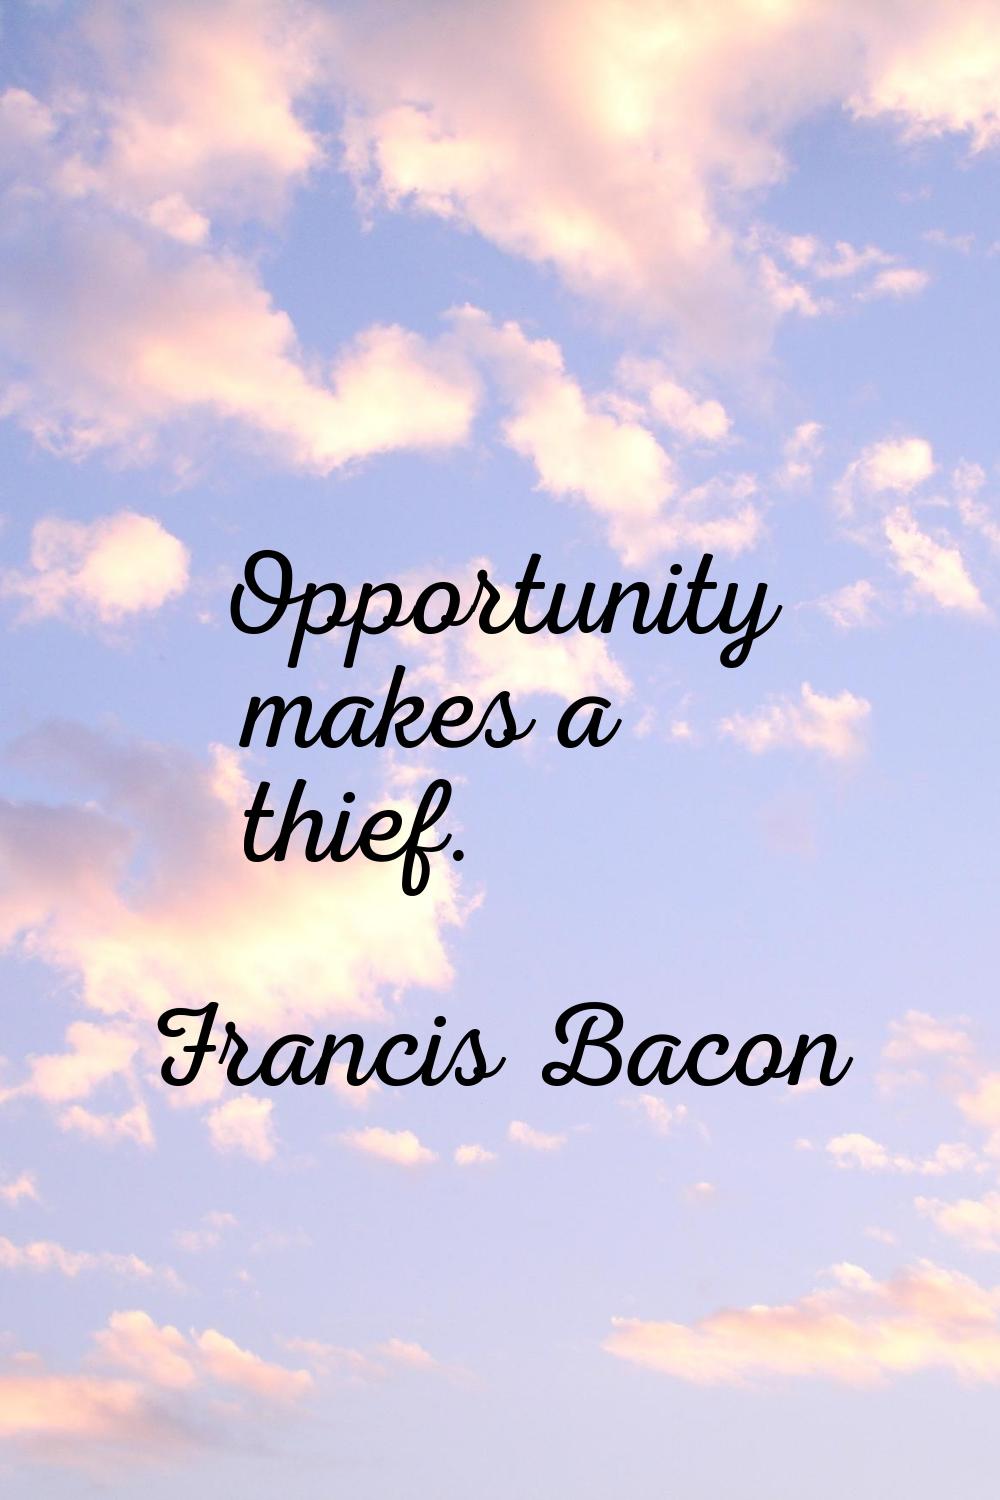 Opportunity makes a thief.